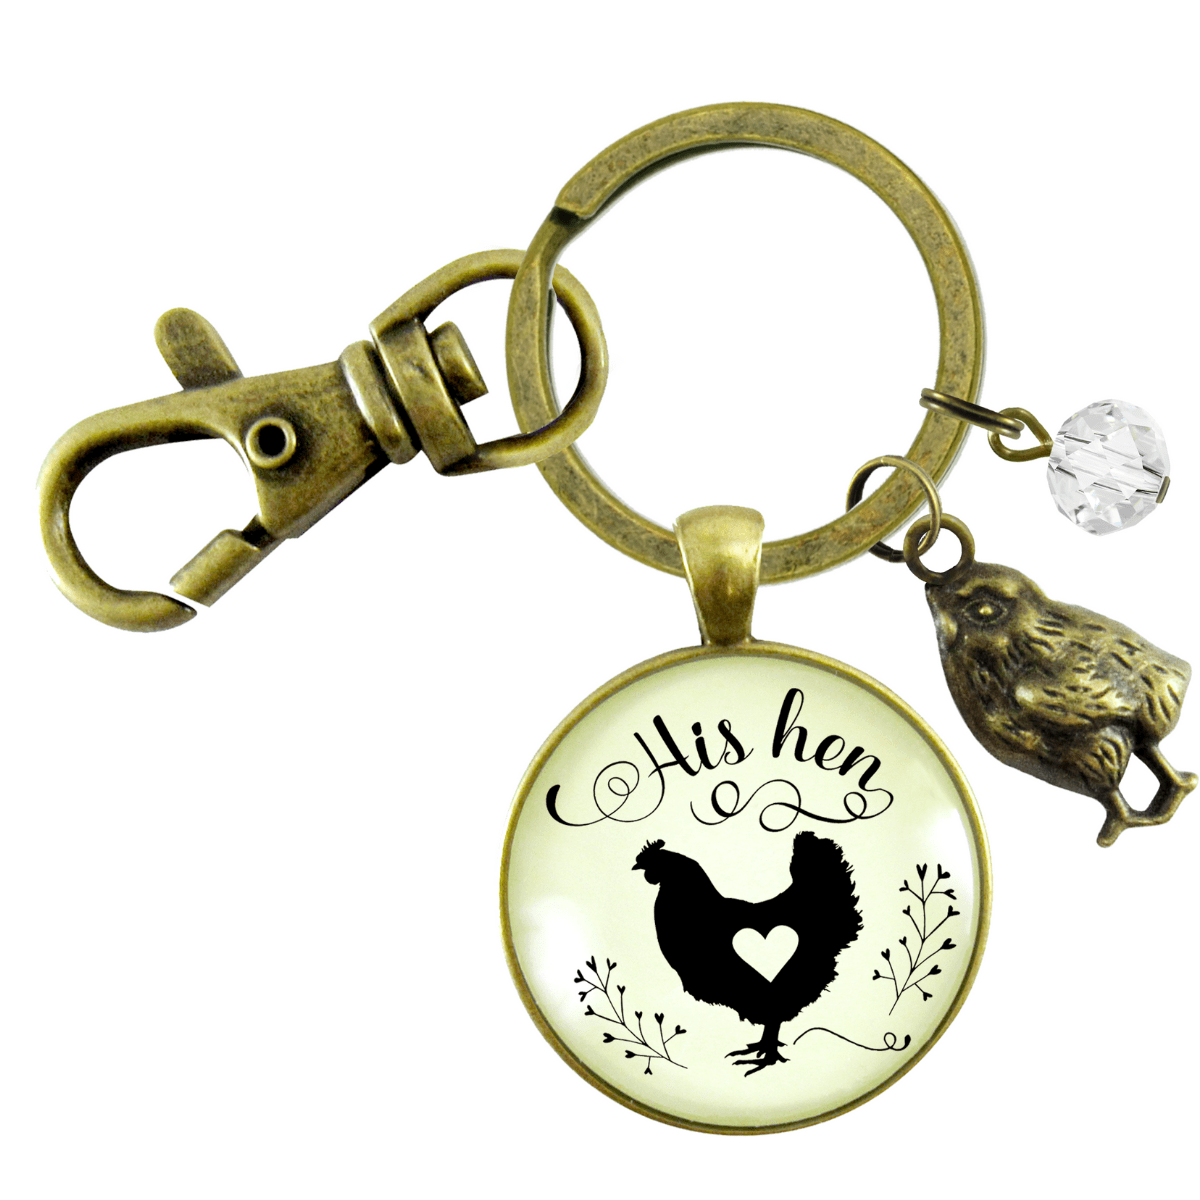 His Hen Keychain For Chicken Mom Vintage Inspired Jewlery - Gutsy Goodness Handmade Jewelry;His Hen Keychain For Chicken Mom Vintage Inspired Jewlery - Gutsy Goodness Handmade Jewelry Gifts